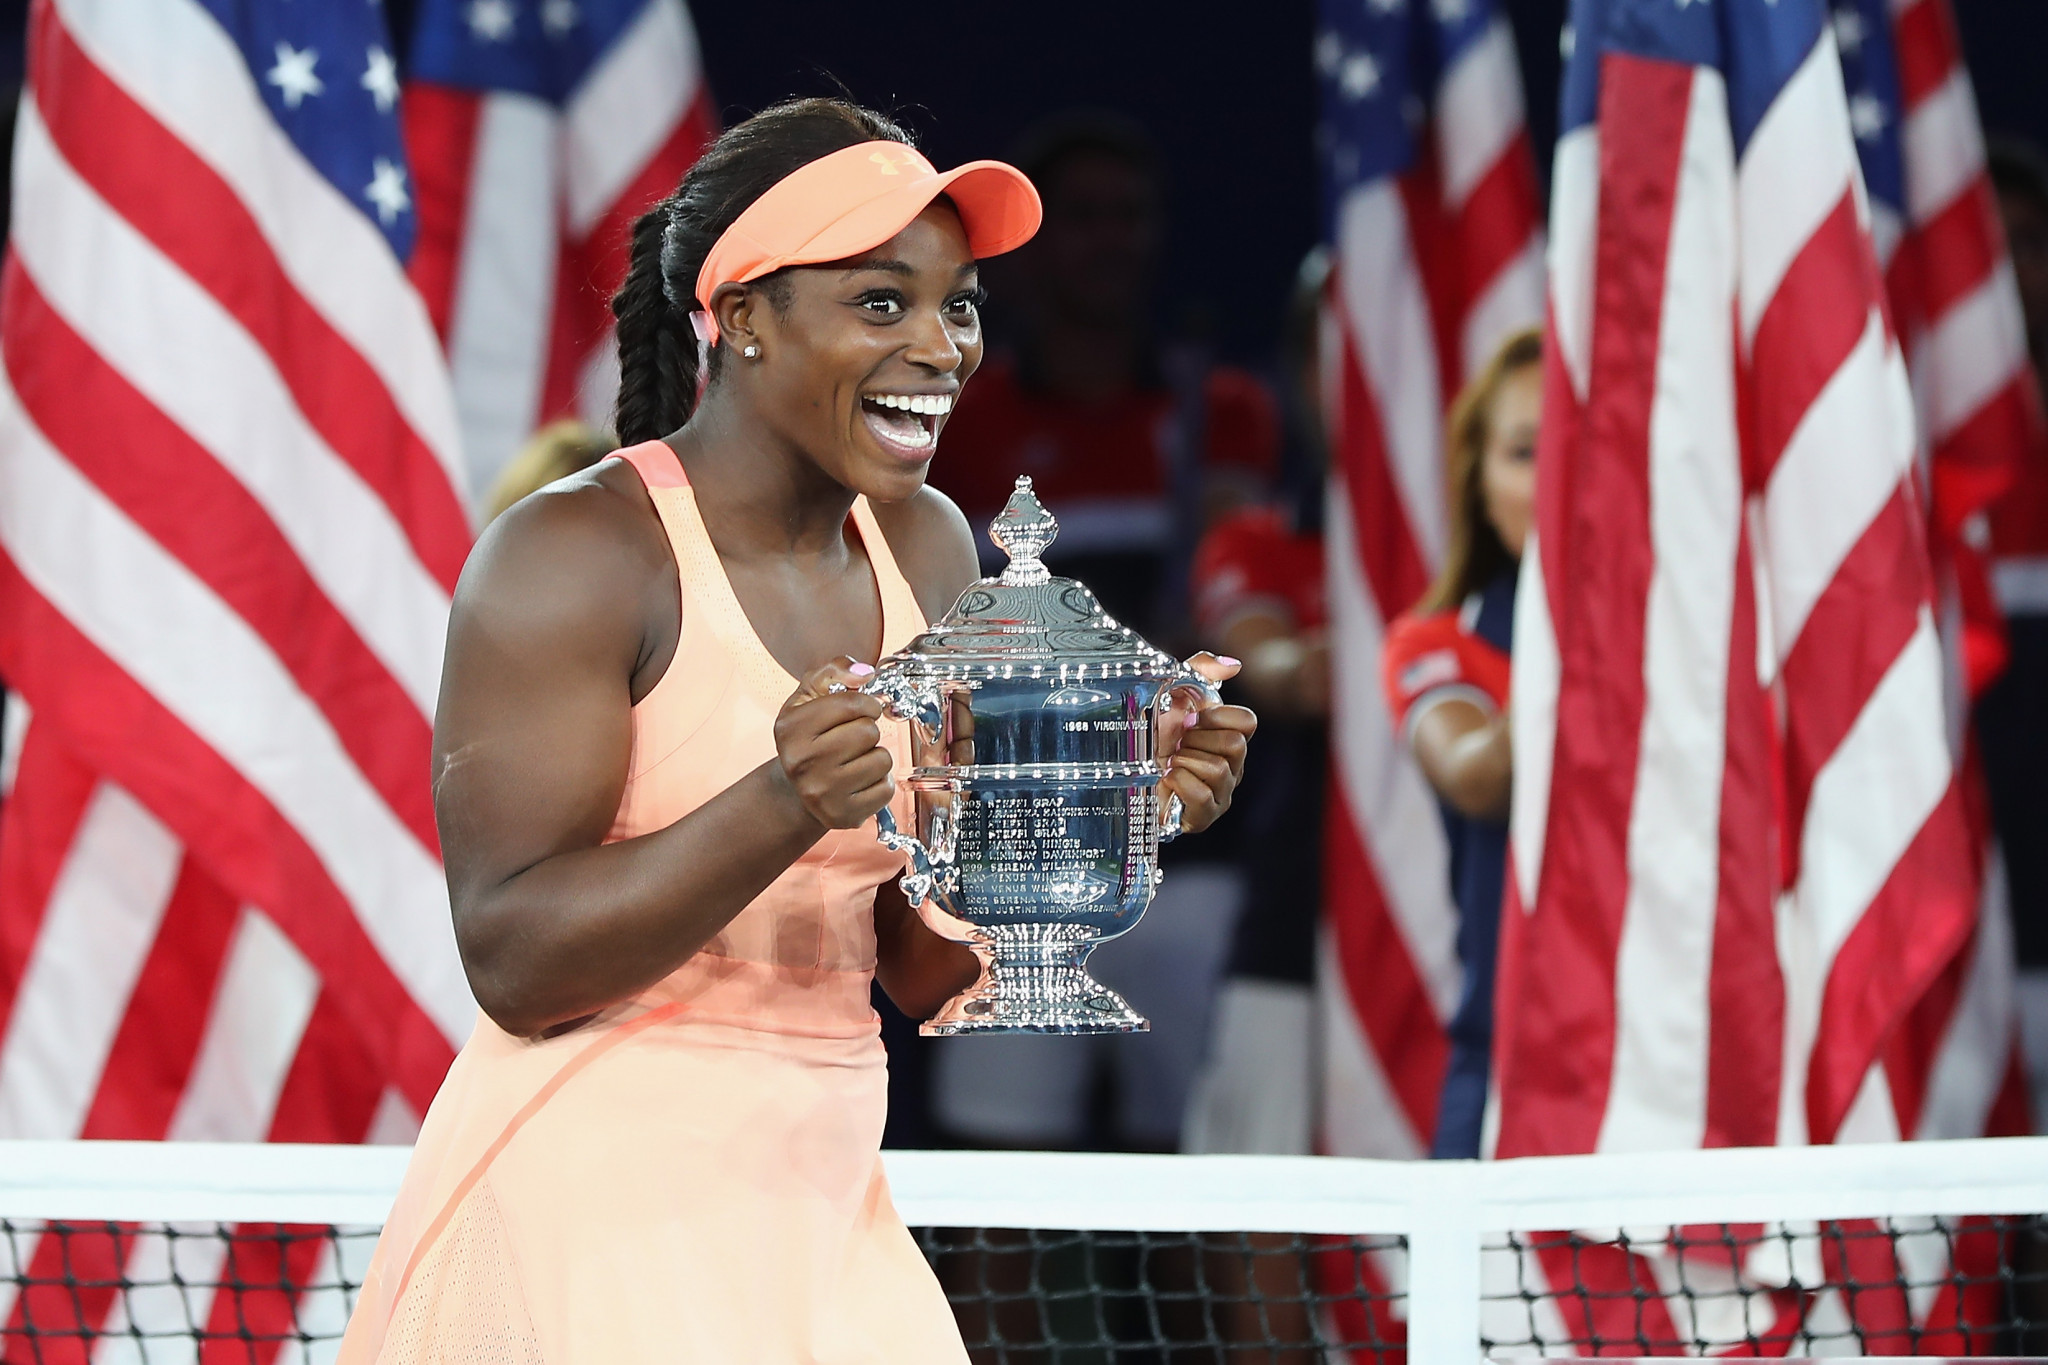 Sloane Stephens is among the women's nominees ©Getty Images